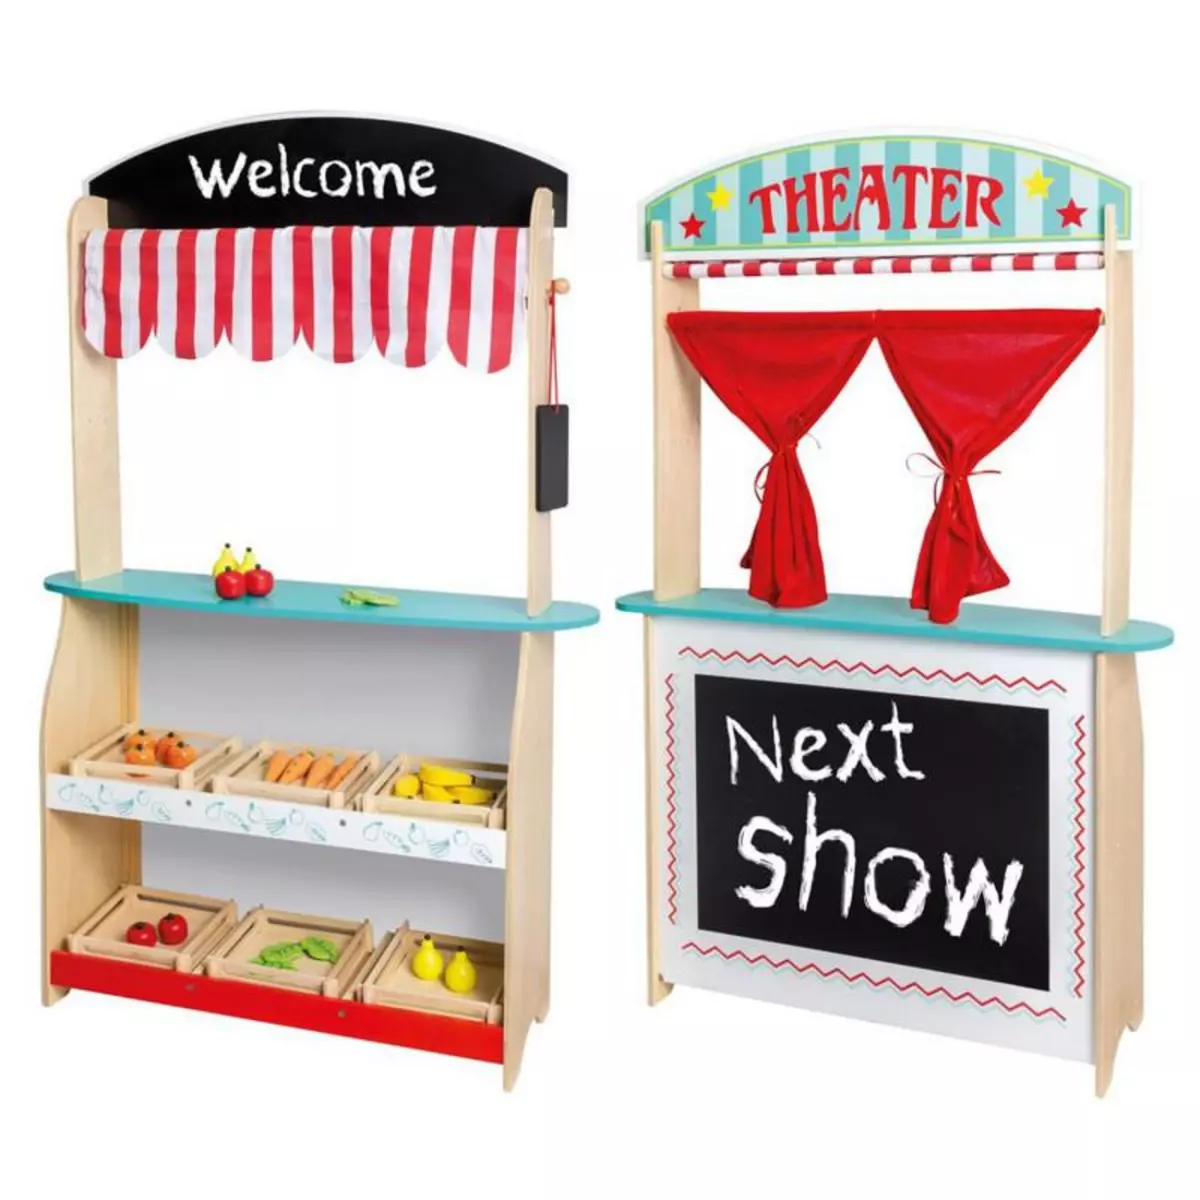  JOUéCO Joueco theatre and Shop with accessories, 2 in 1